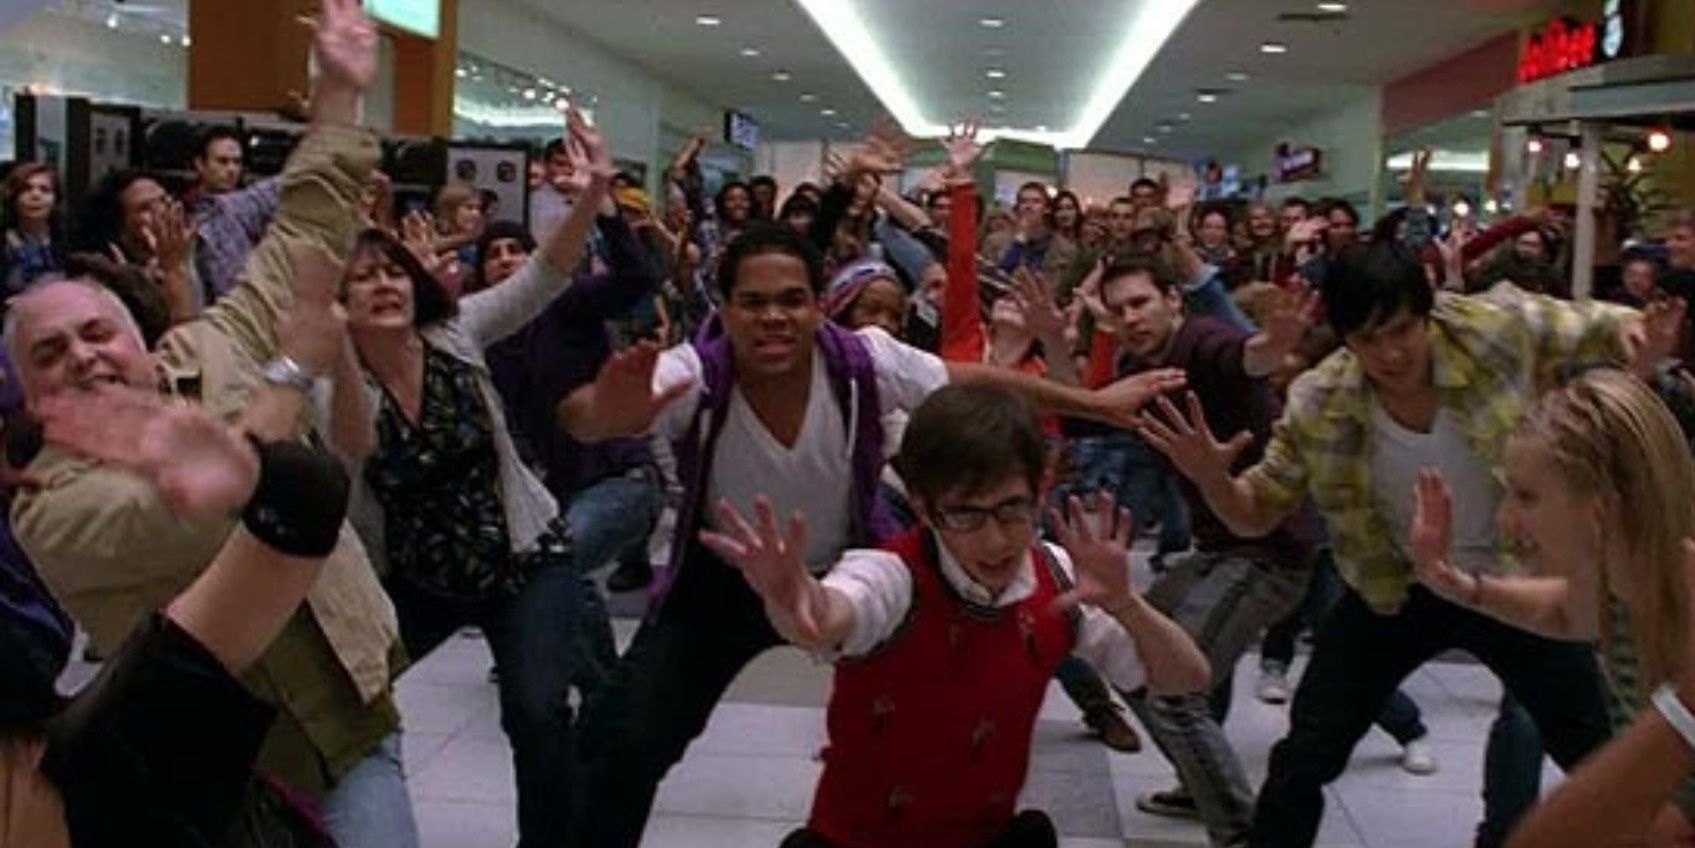 Artie leads a large crowd in a dance number in Glee